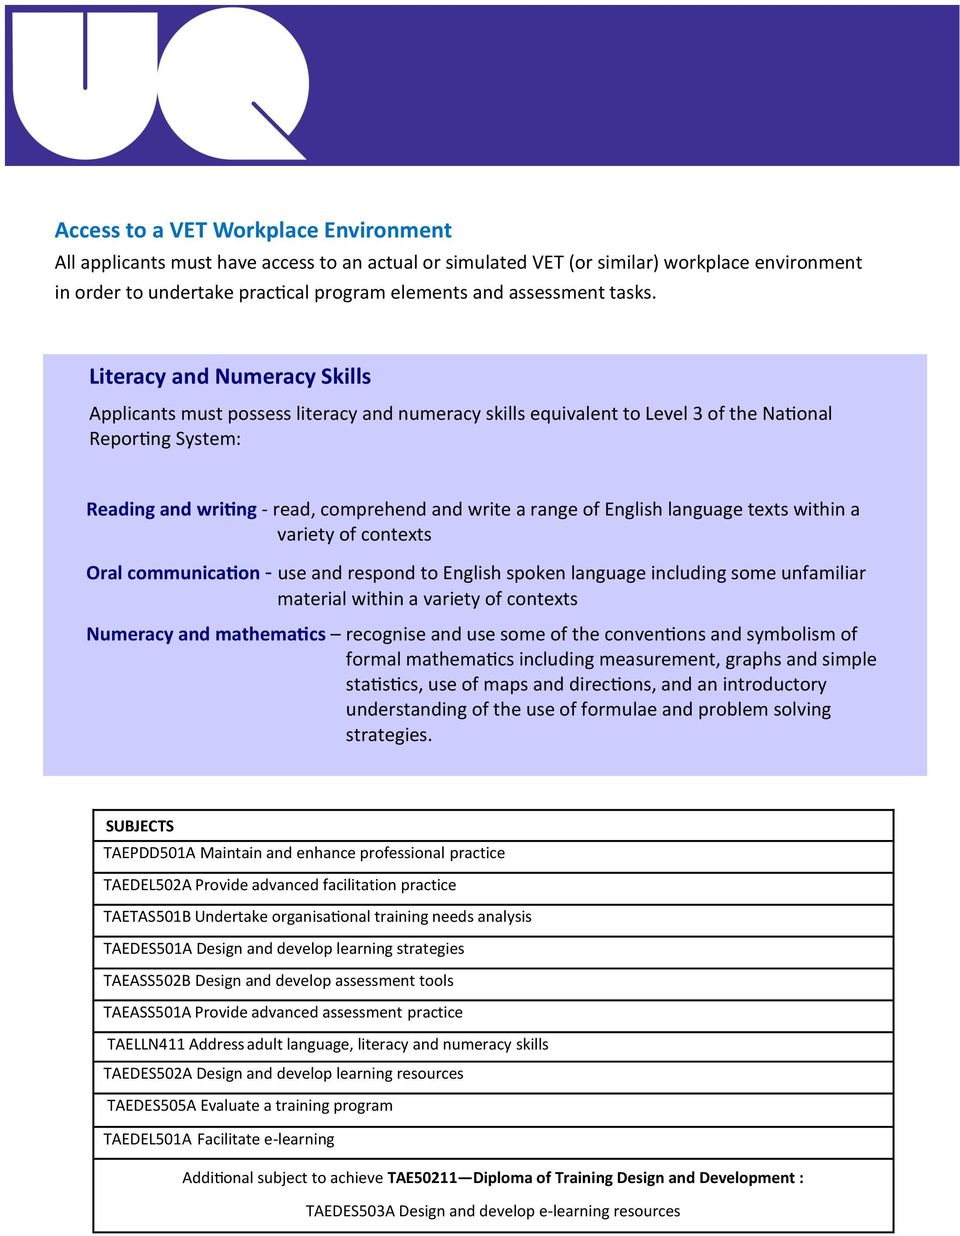 Literacy Numeracy Skills Applicants must possess literacy numeracy skills equivalent to Level 3 of the National Reporting System: Reading writing - read, comprehend write a range of English language